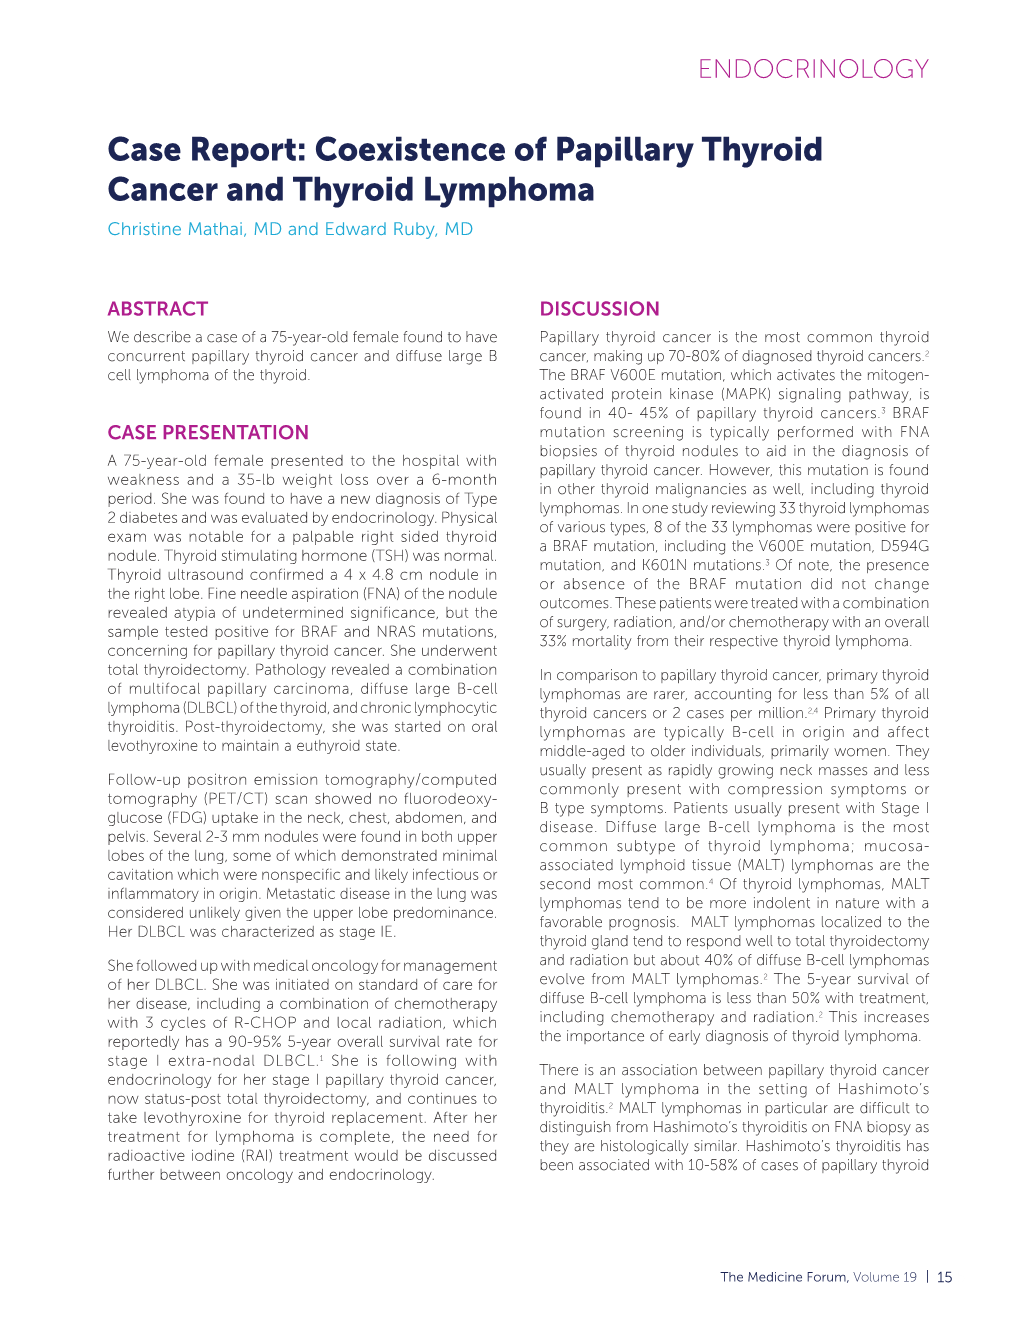 Coexistence of Papillary Thyroid Cancer and Thyroid Lymphoma Christine Mathai, MD and Edward Ruby, MD